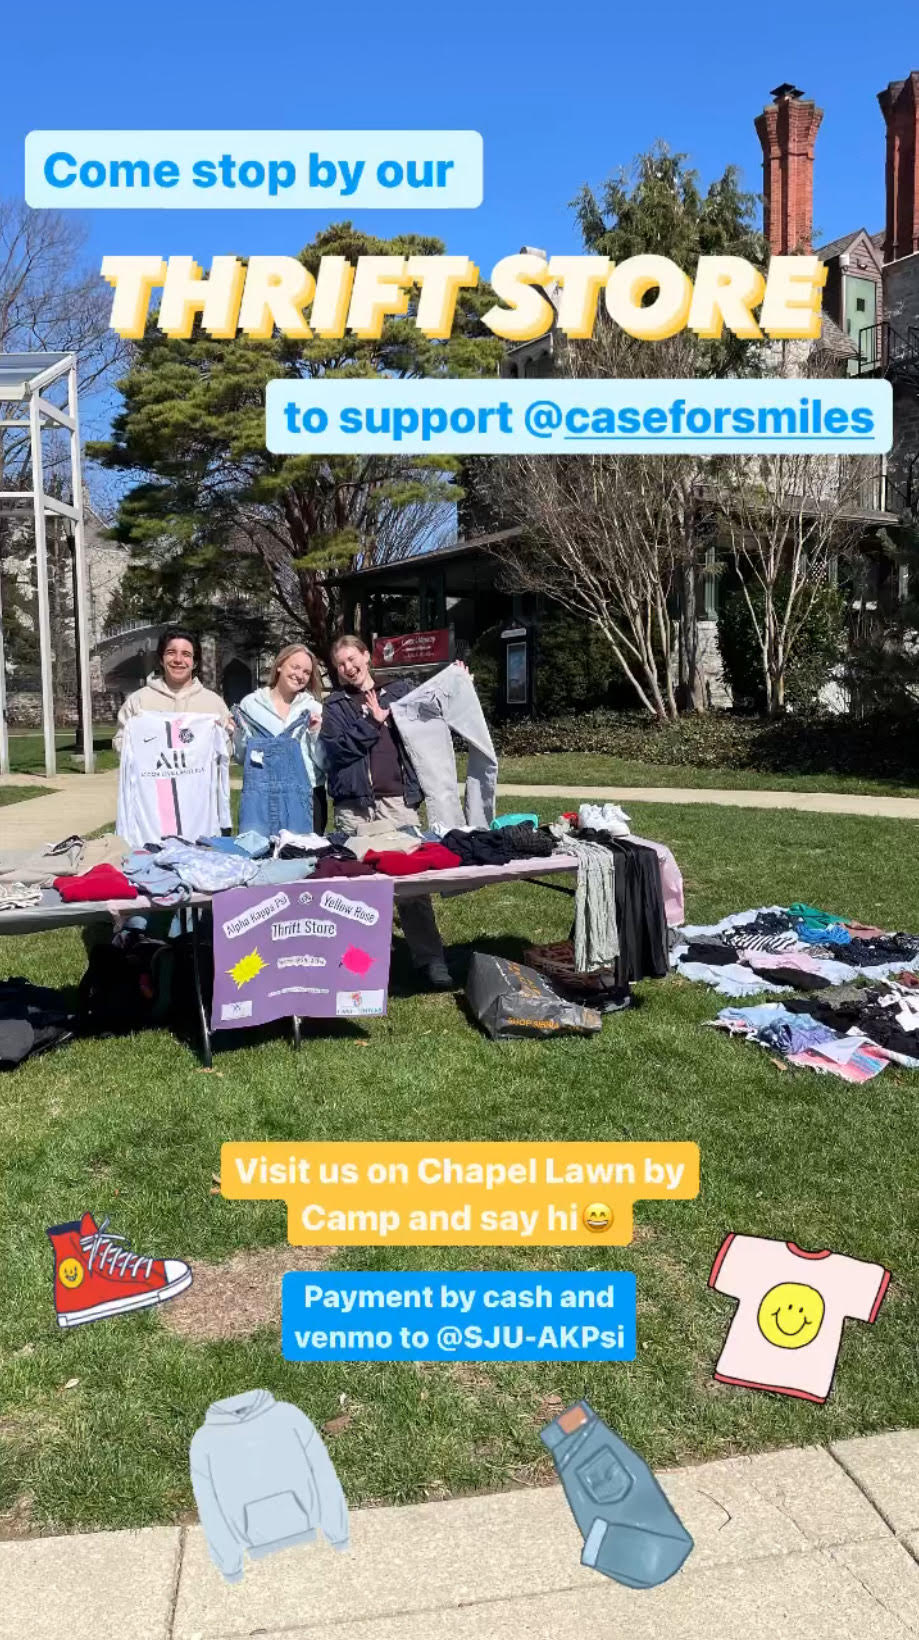 Story created for instgram promoting a thrist store fundraiser hosted by alpha kappa psi chi delta. image shows stuends outside with tables with clothing on them.